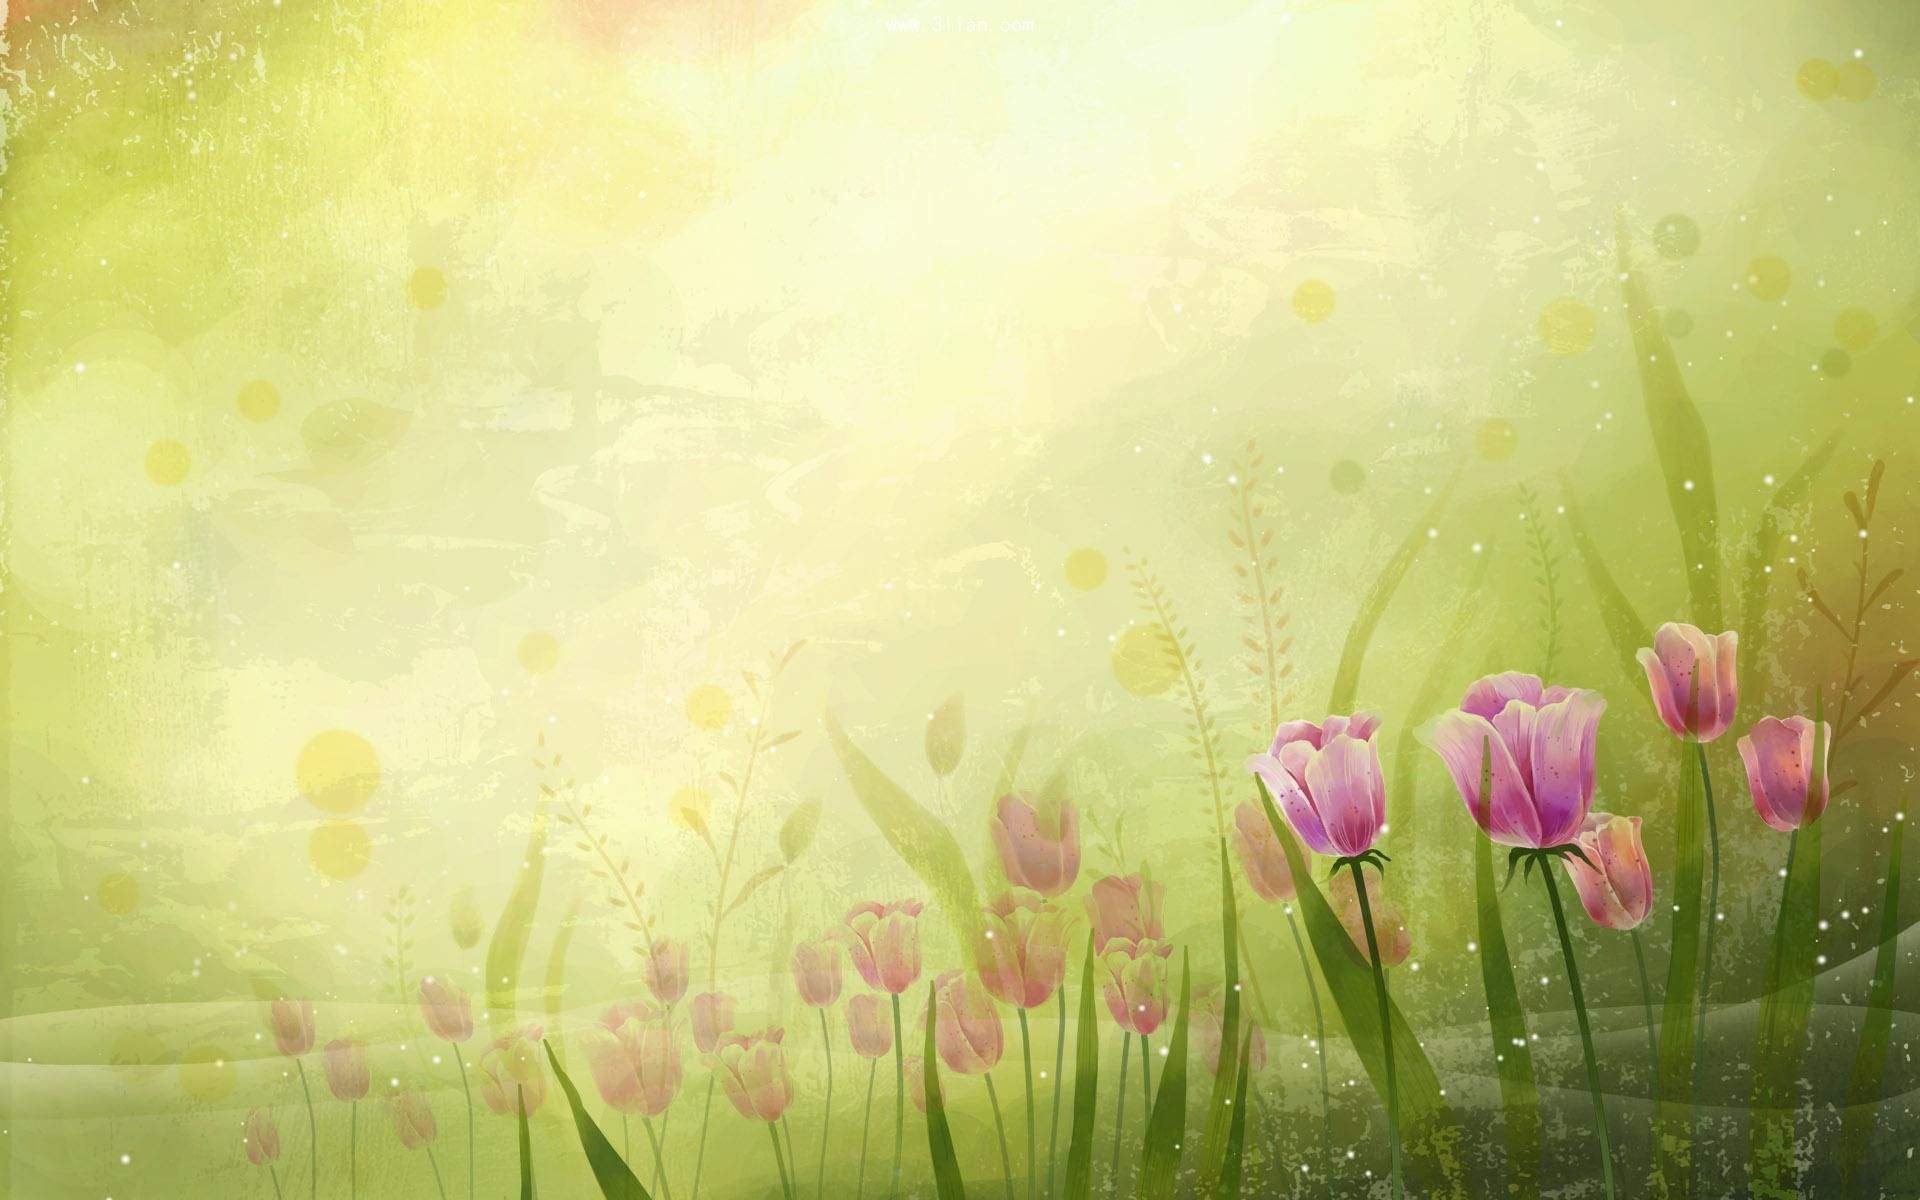 May Flowers PowerPoint Background. Beautiful Flowers Wallpaper, Pretty Flowers Wallpaper and Amazing Flowers Wallpaper